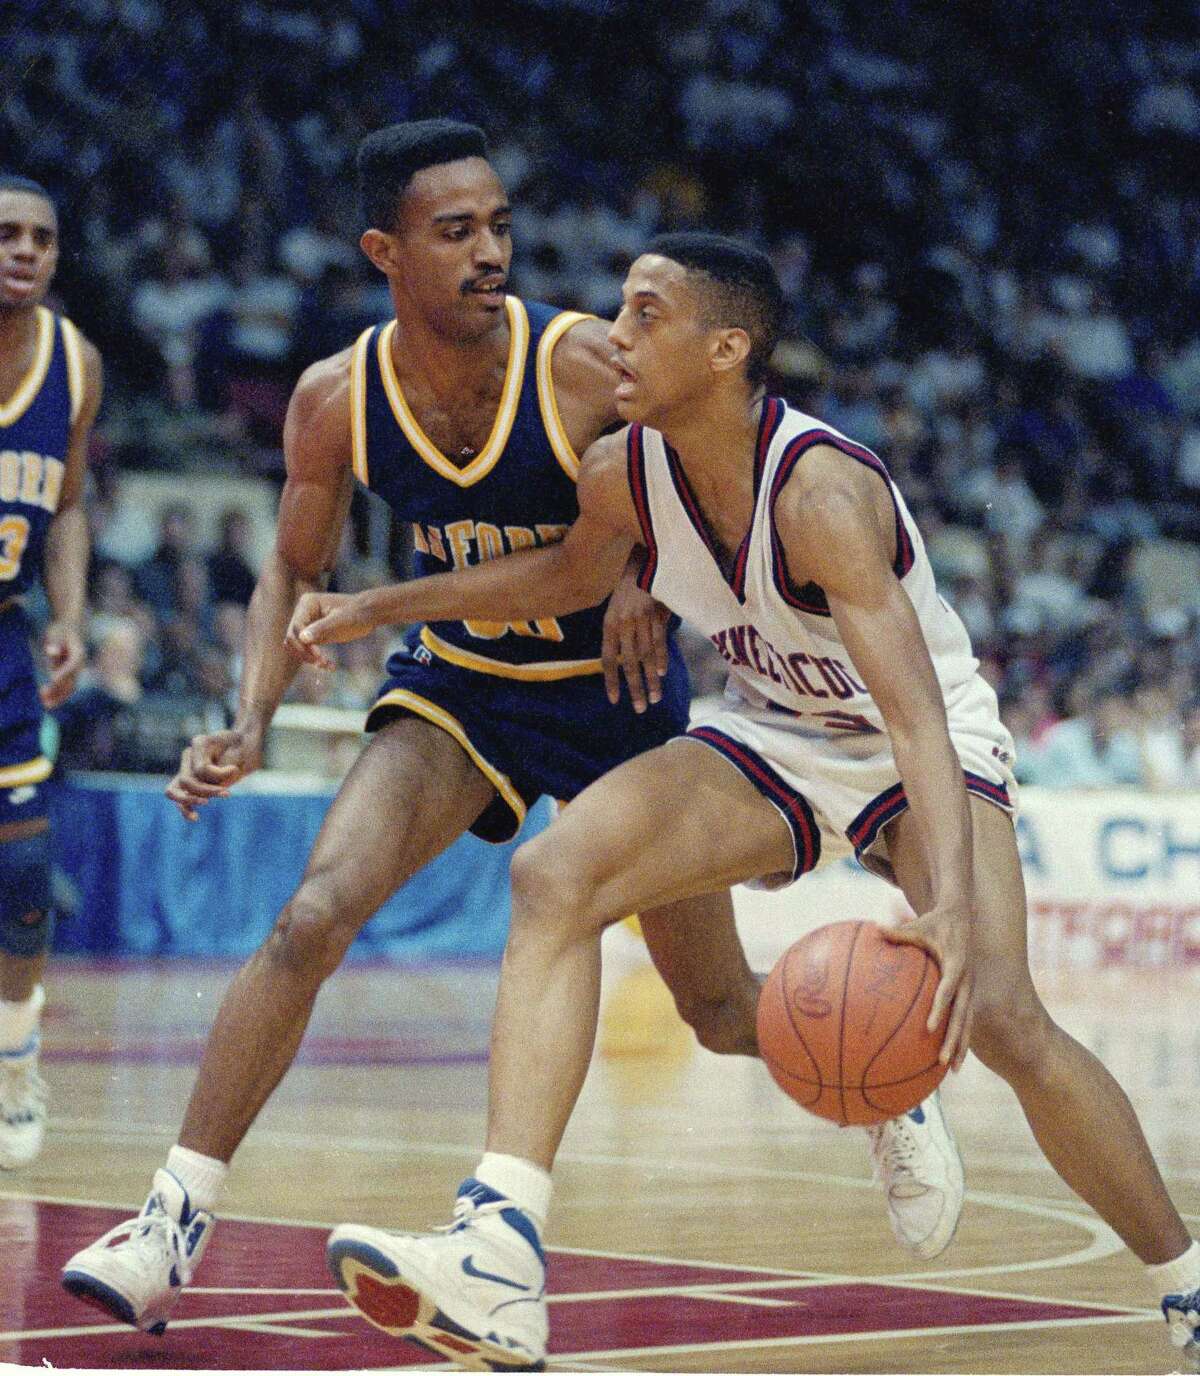 Tate George (right) during the 1990 NCAA tournament.